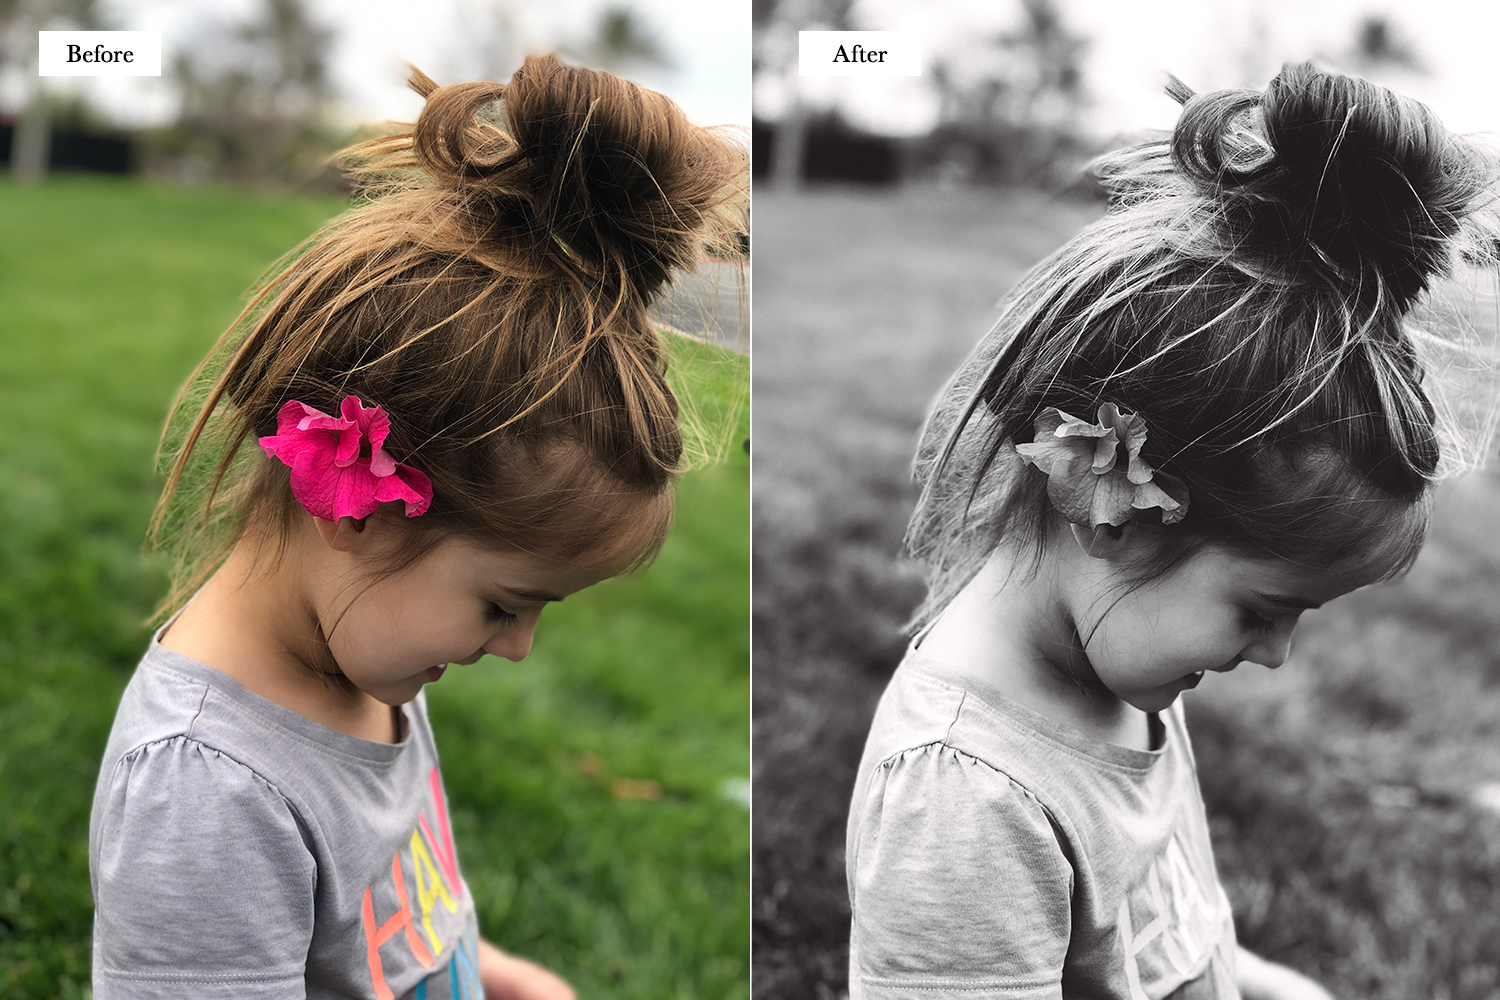 Introducing the Everyday Preset Collection for Lightroom Mobile! A pack of five beautiful presets to enhance your everyday photography and used exclusively with the free Lightroom Mobile app. Get them now at KaraLayne.com #LightroomMobile #MobilePresetPack #HowToEditPhotos #PhotoEditingApps